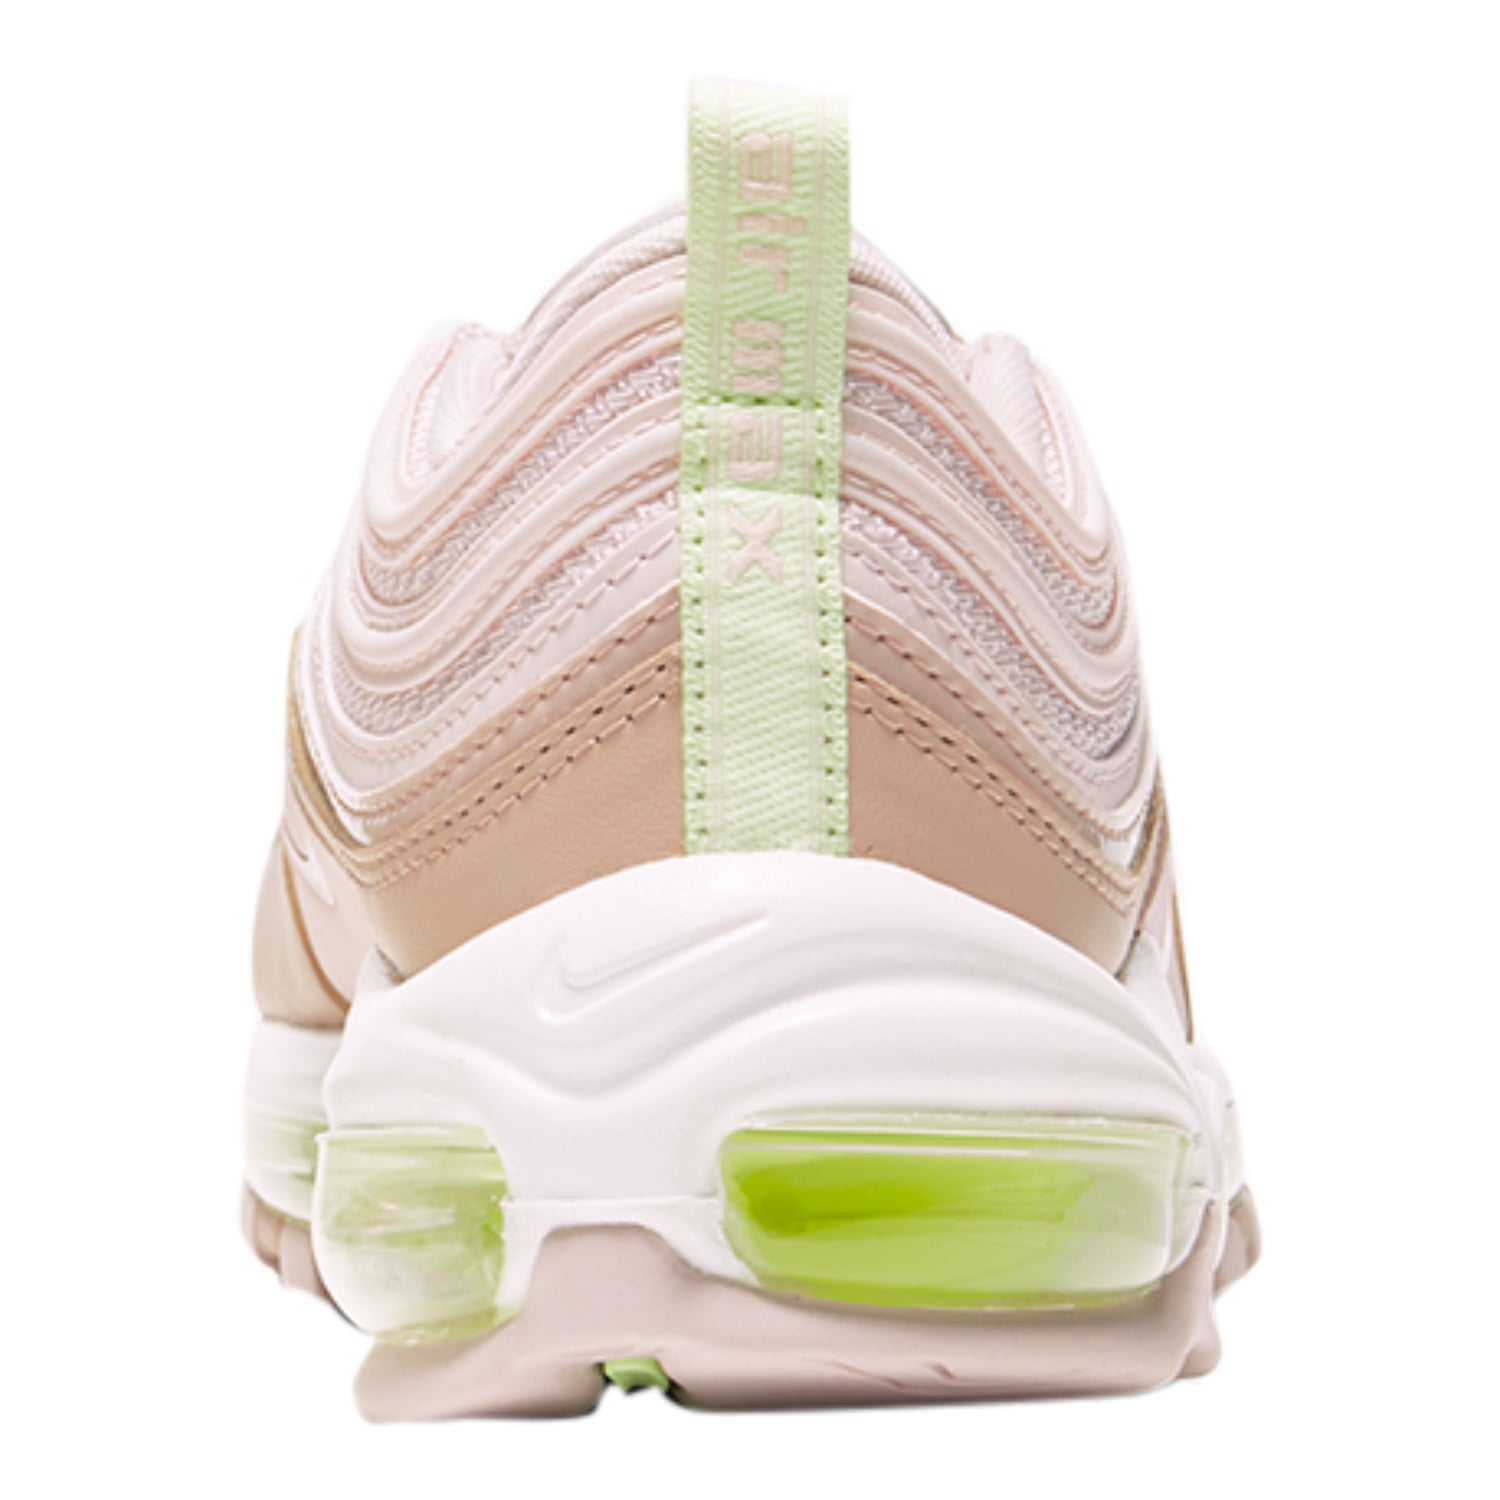 Nike Air Max 97 Barely Rose Volt (Women's)